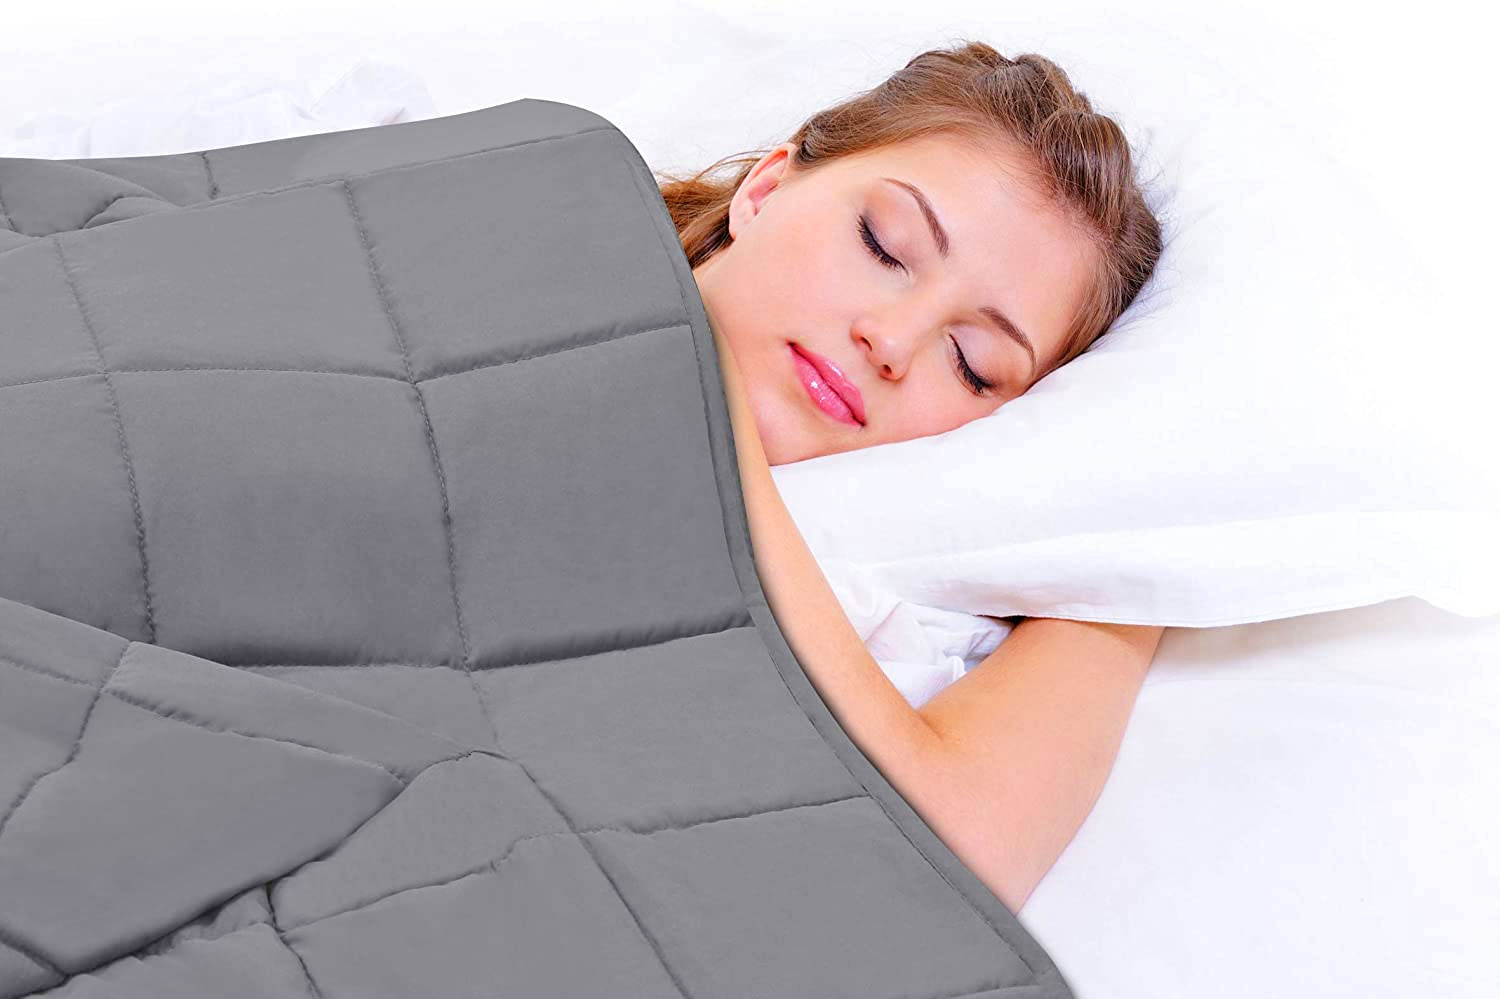 Weighted Blanket with Sleeves - Snuggie Weighted Blanket